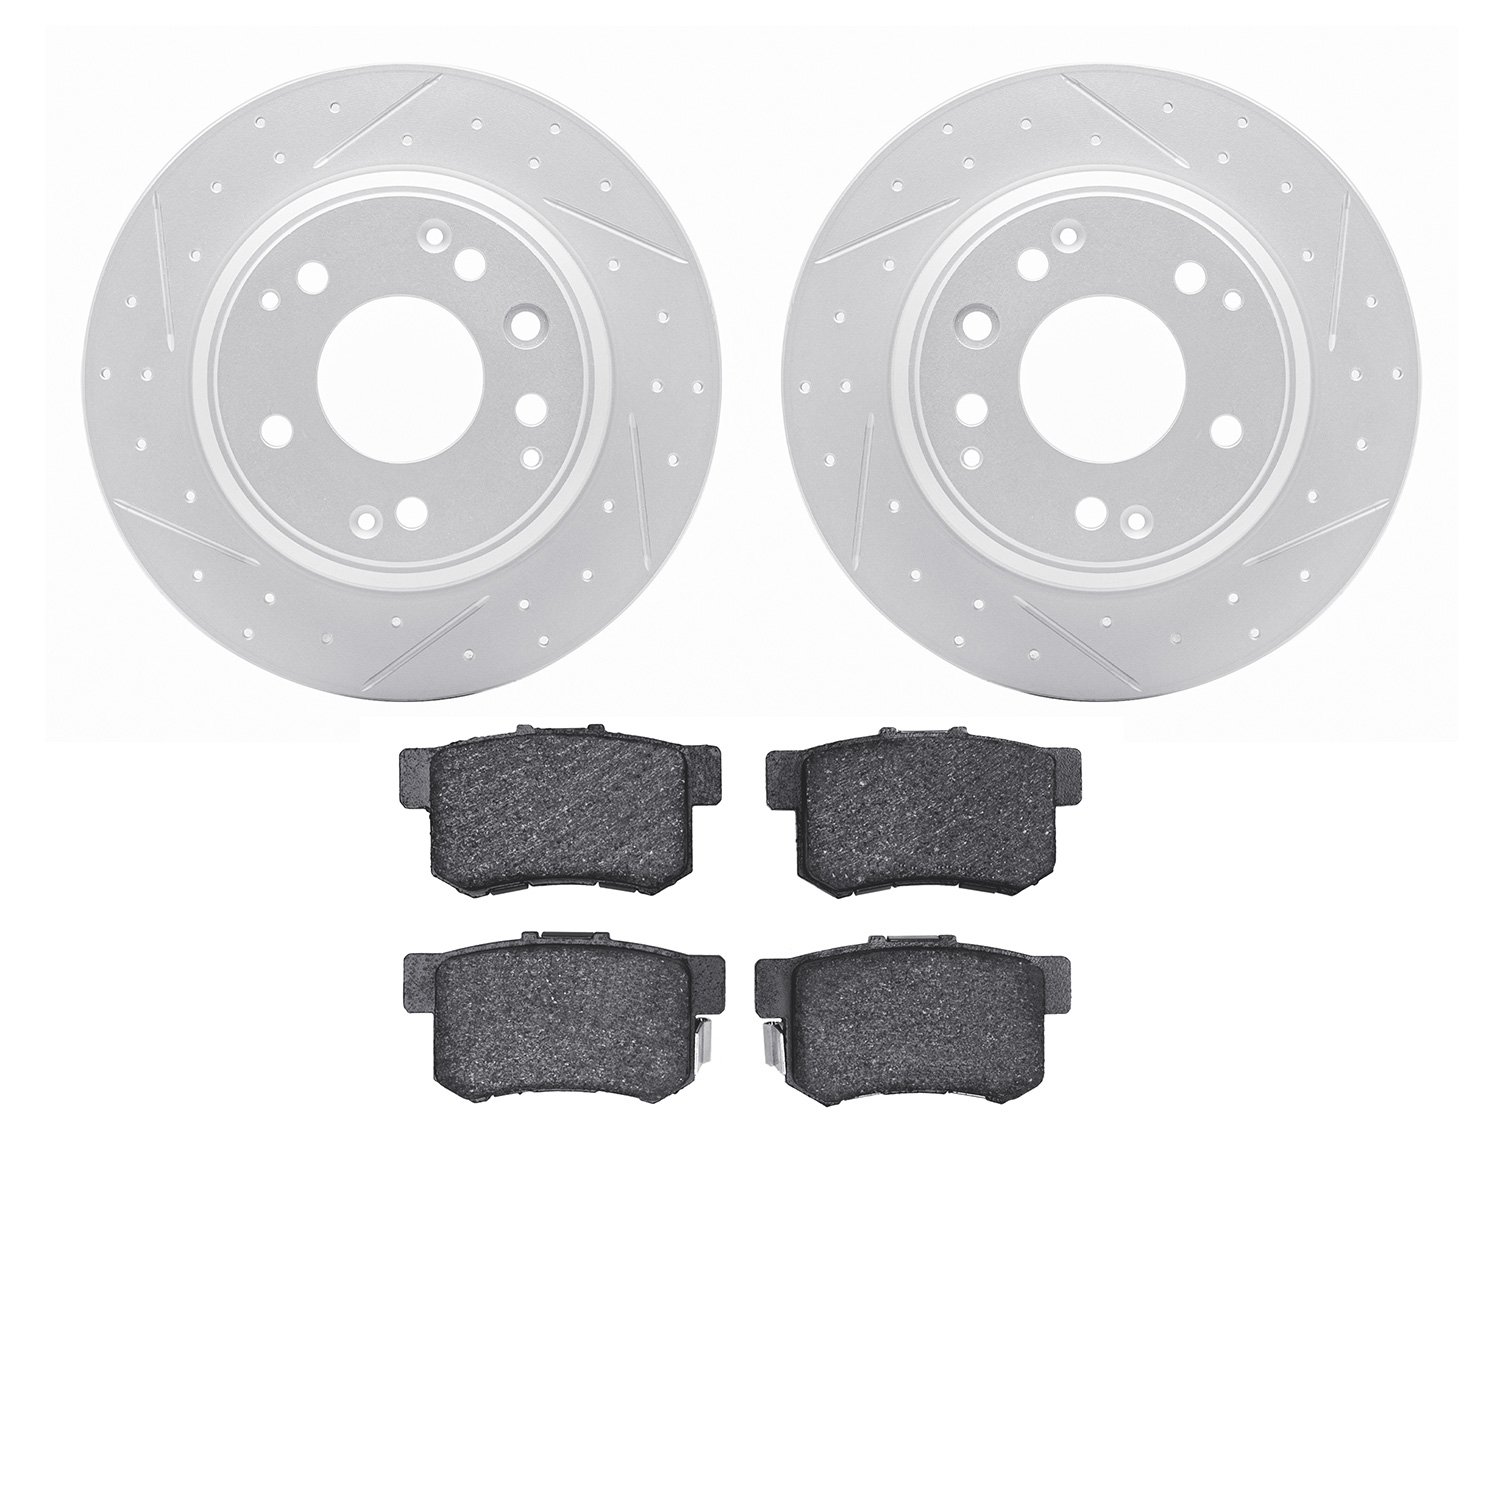 2502-59047 Geoperformance Drilled/Slotted Rotors w/5000 Advanced Brake Pads Kit, 1995-1998 Acura/Honda, Position: Rear